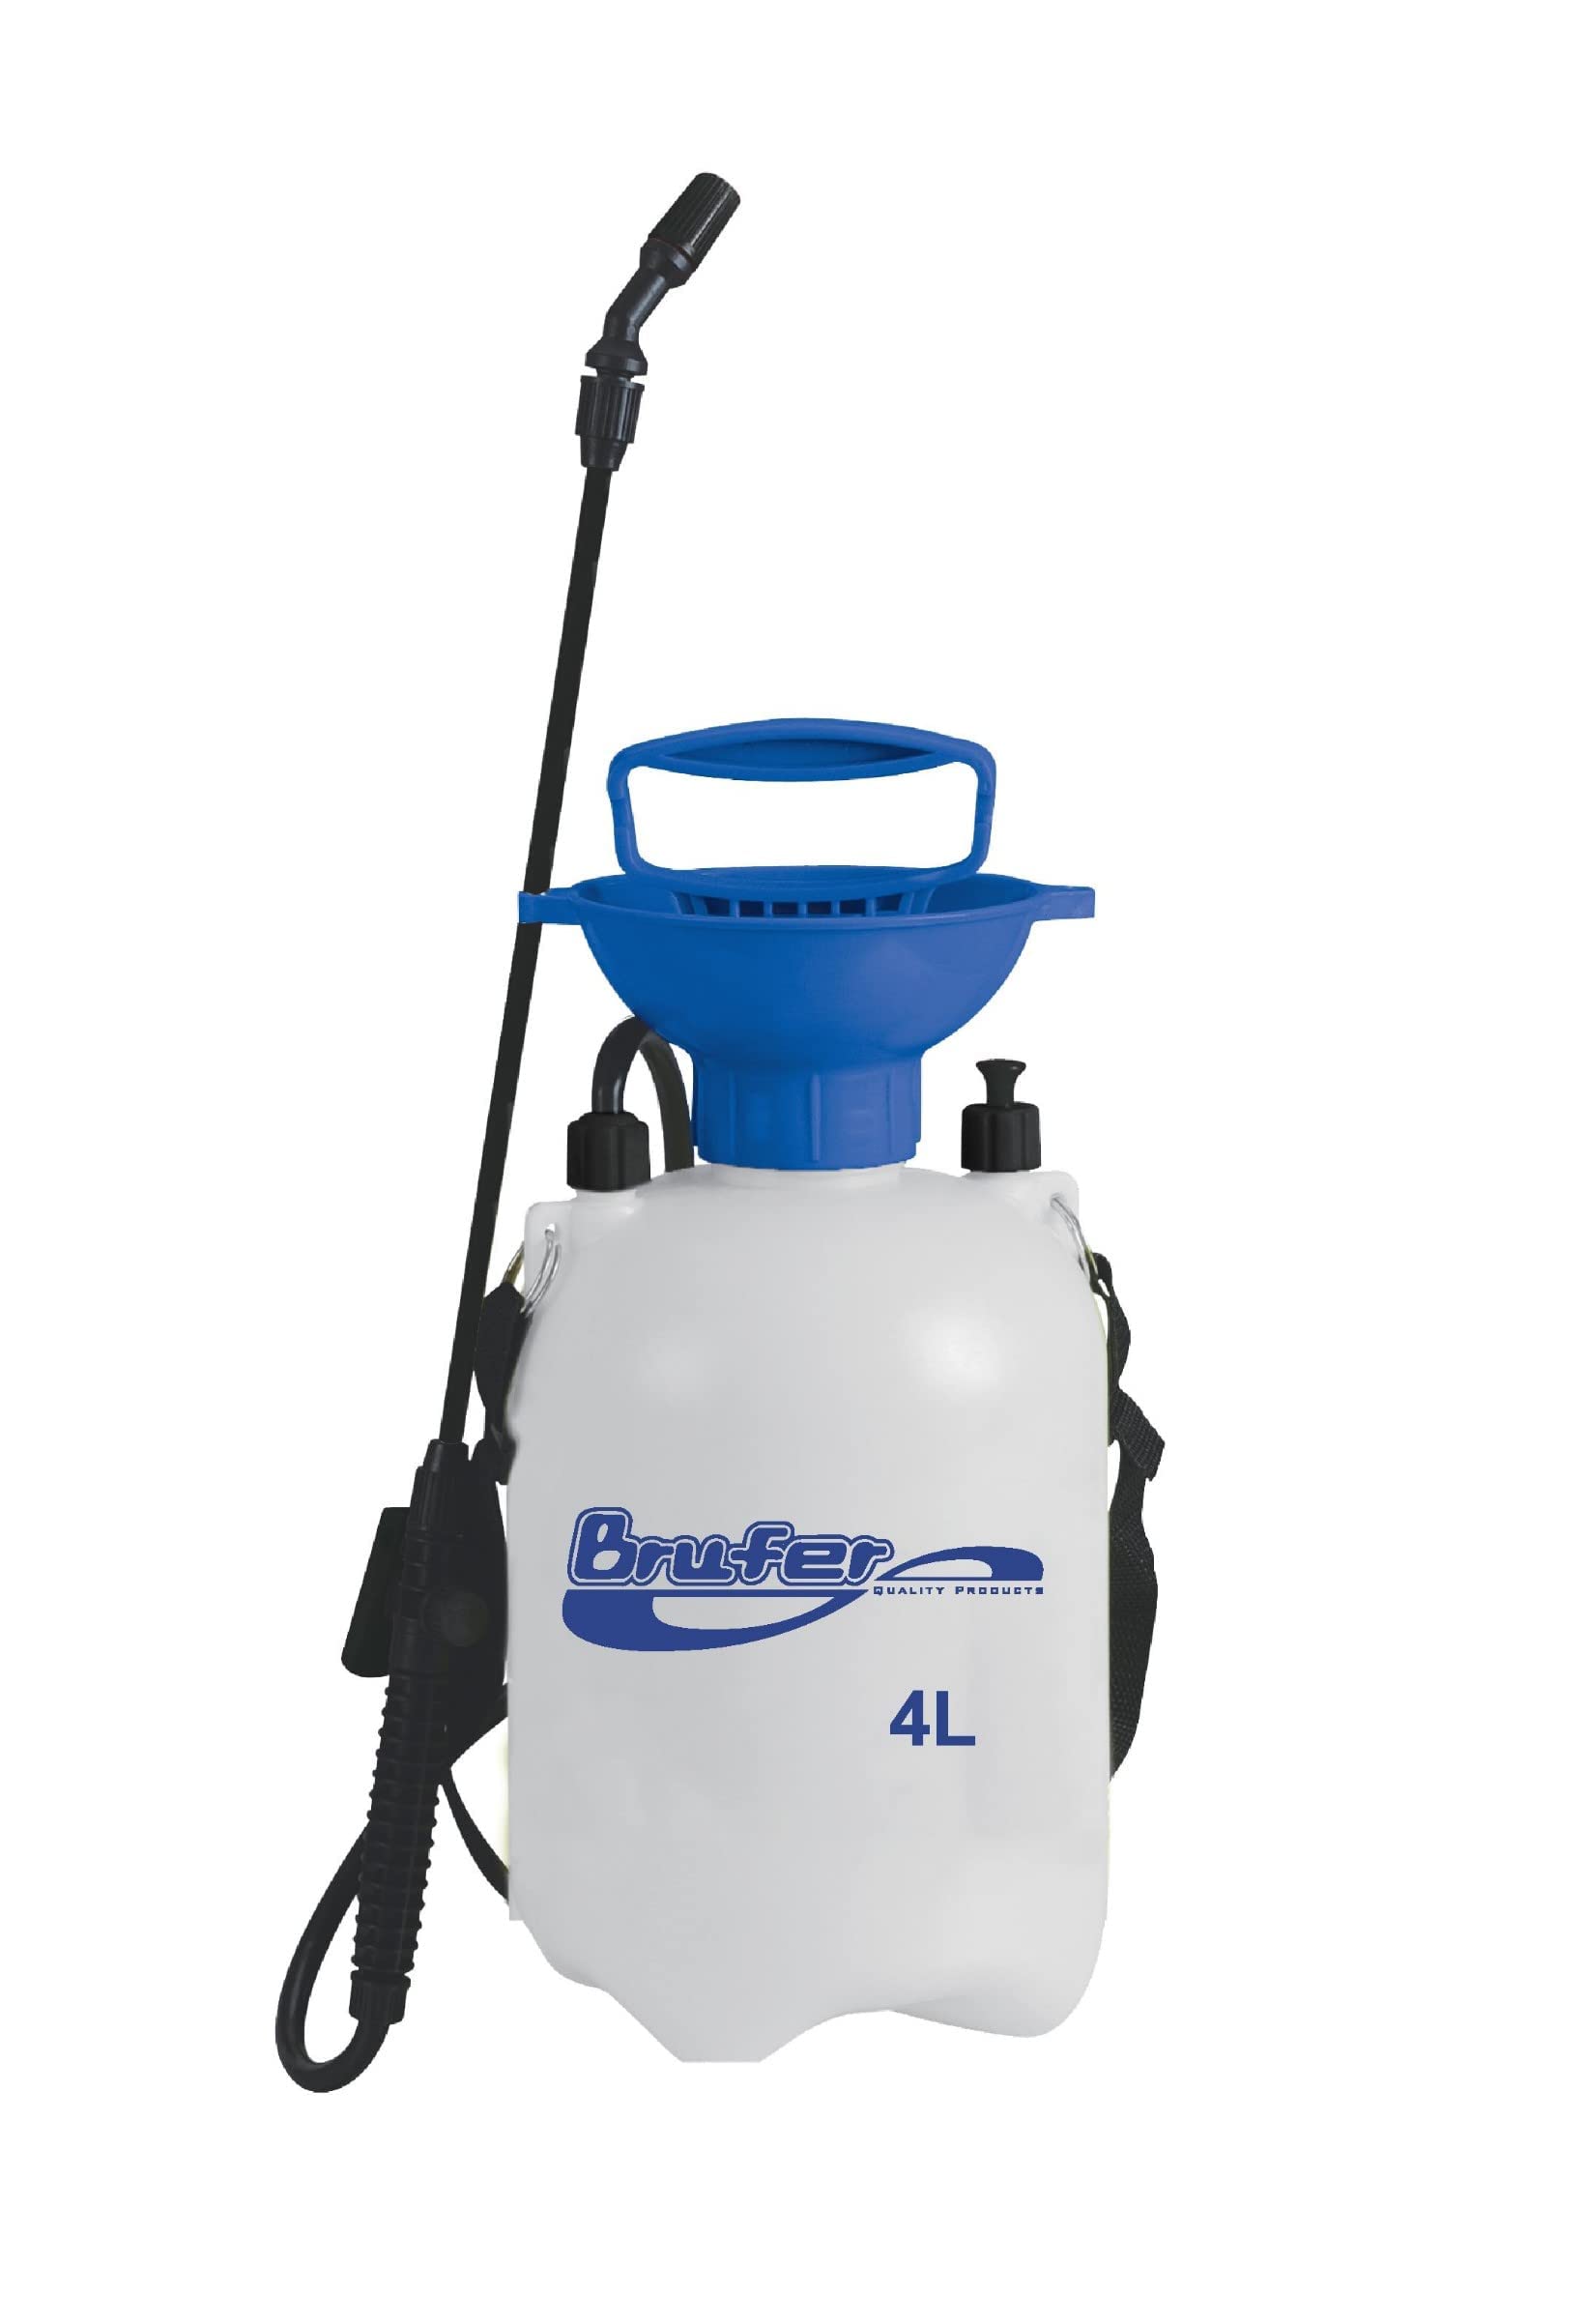 BRUFER Quality Products BRUFER 72022 Sprayer for Lawns and Gardens or Cleaning Decks, Siding and Concrete - 1.1 Gallon (4L) with Pressure Release Valve